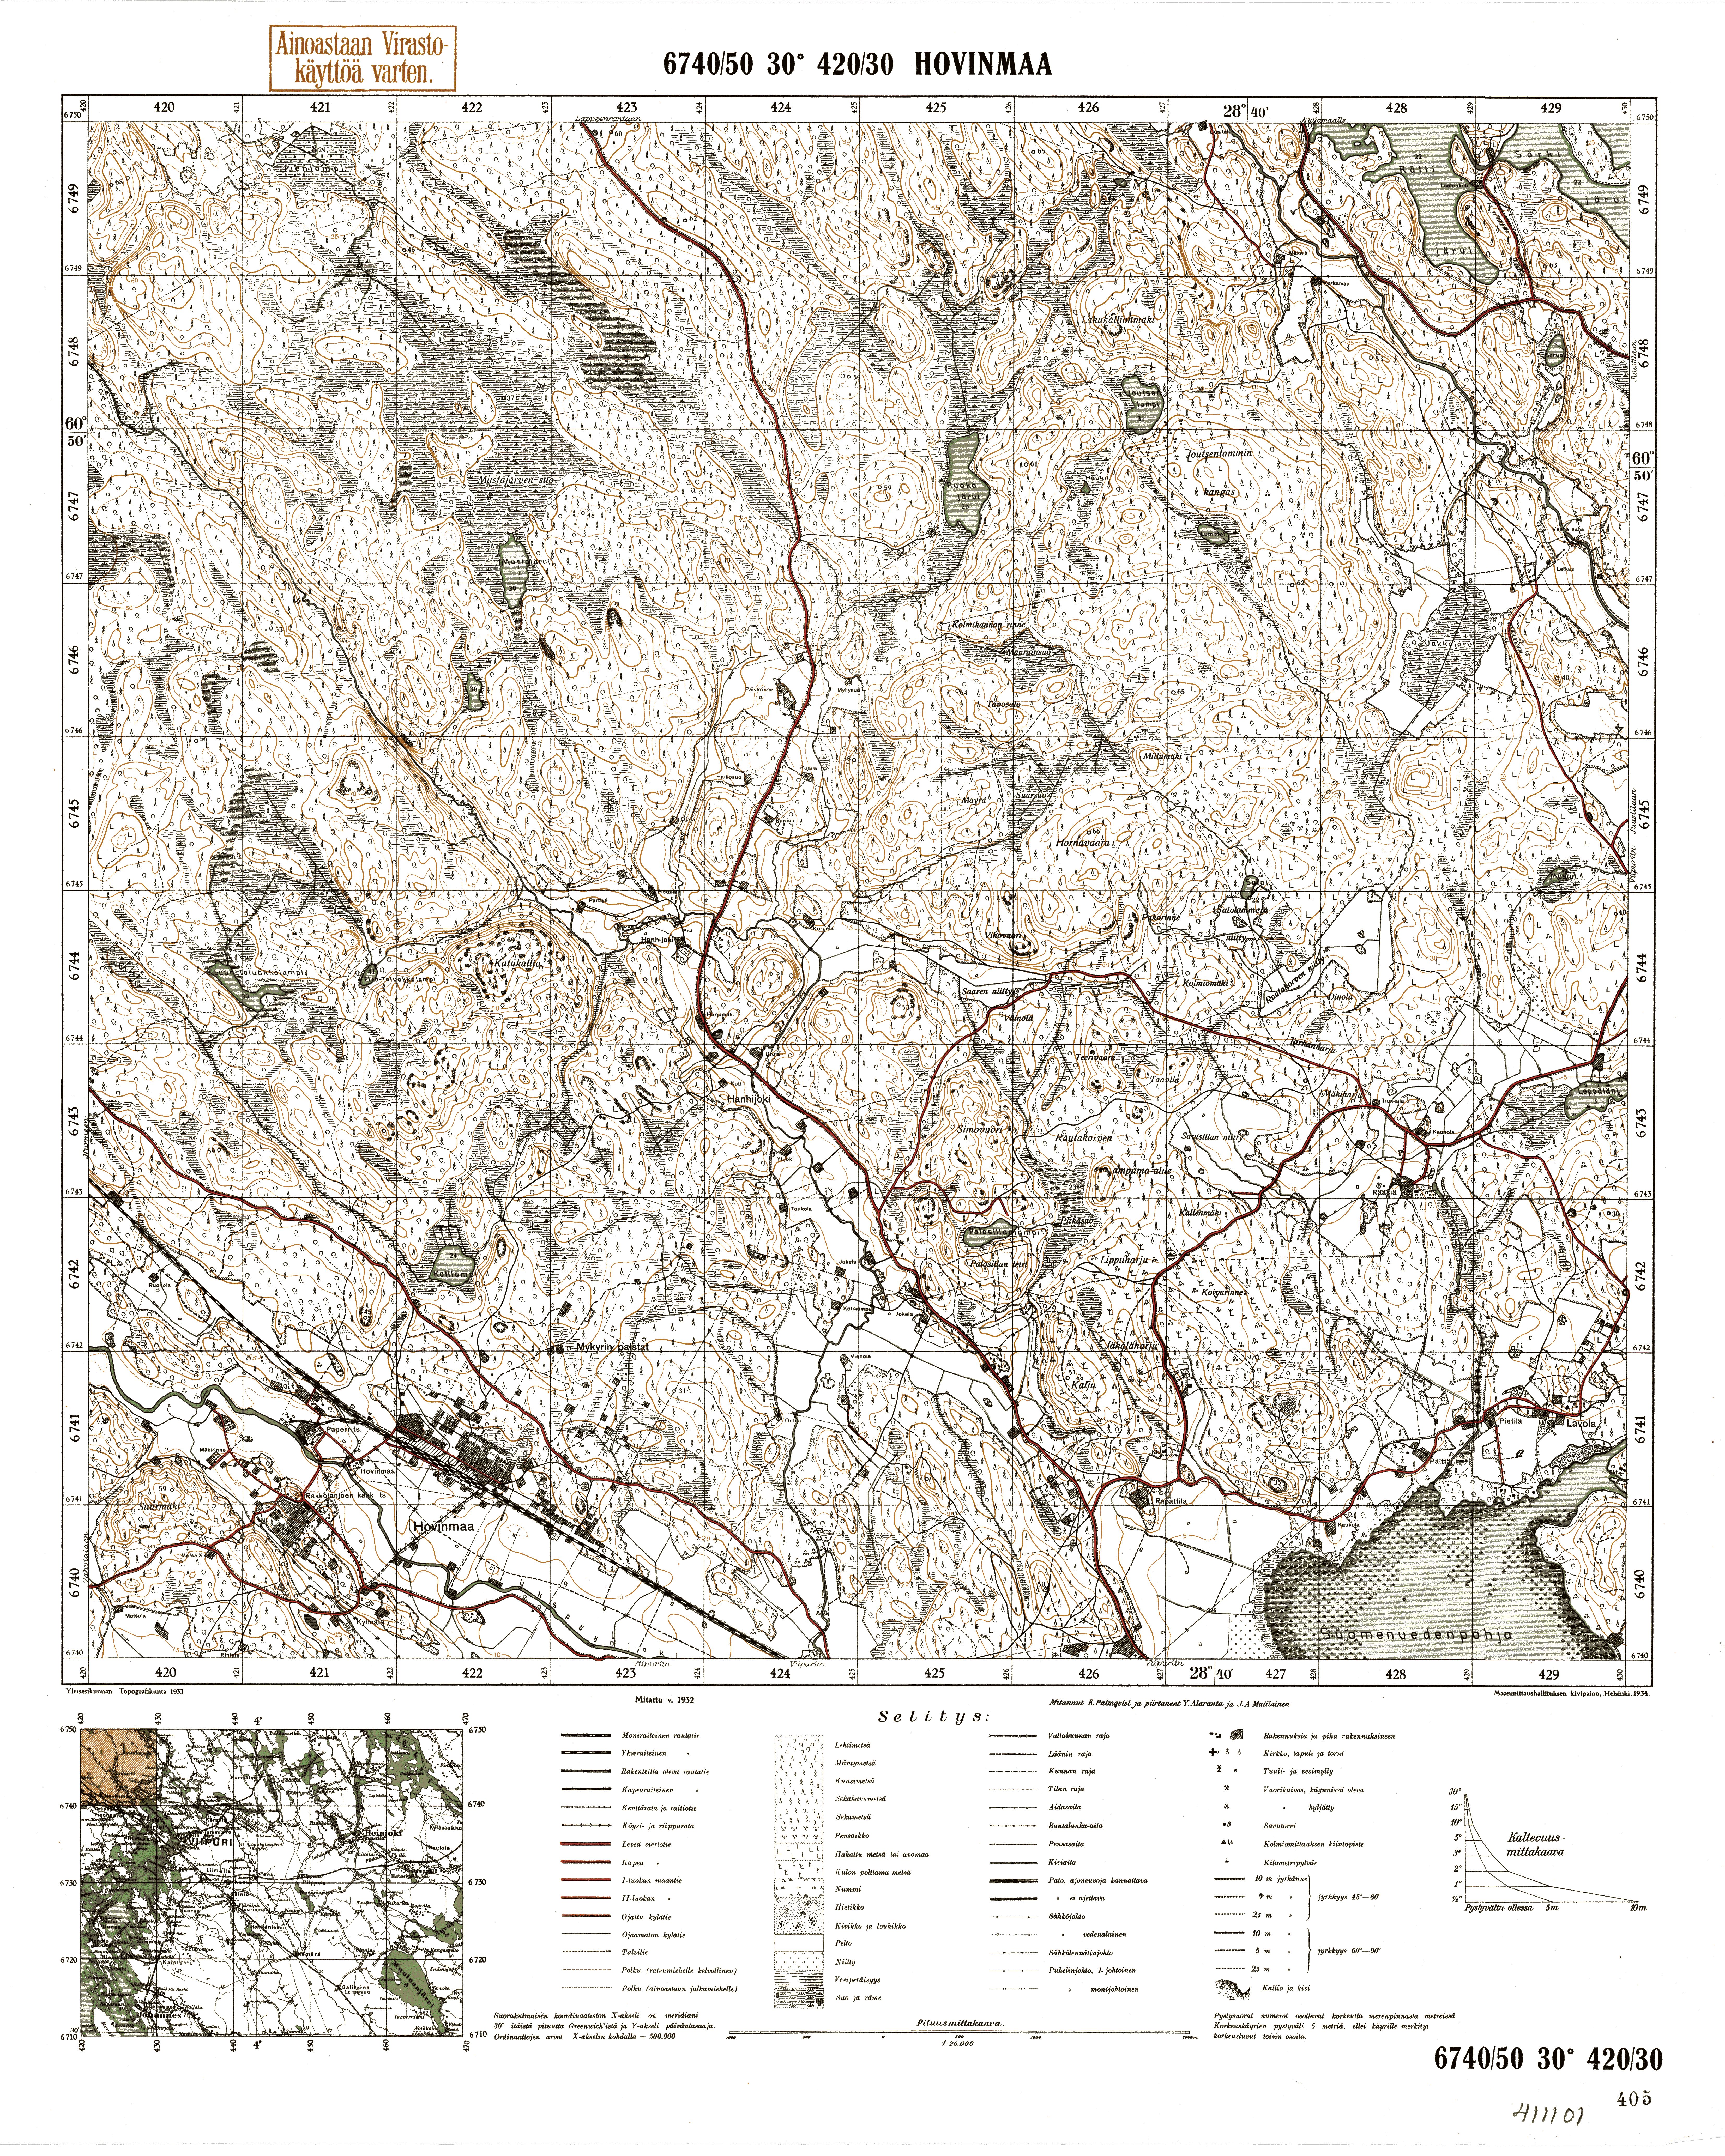 Bulatnoje Village Site. Hovinmaa. Topografikartta 411101. Topographic map from 1942. Use the zooming tool to explore in higher level of detail. Obtain as a quality print or high resolution image